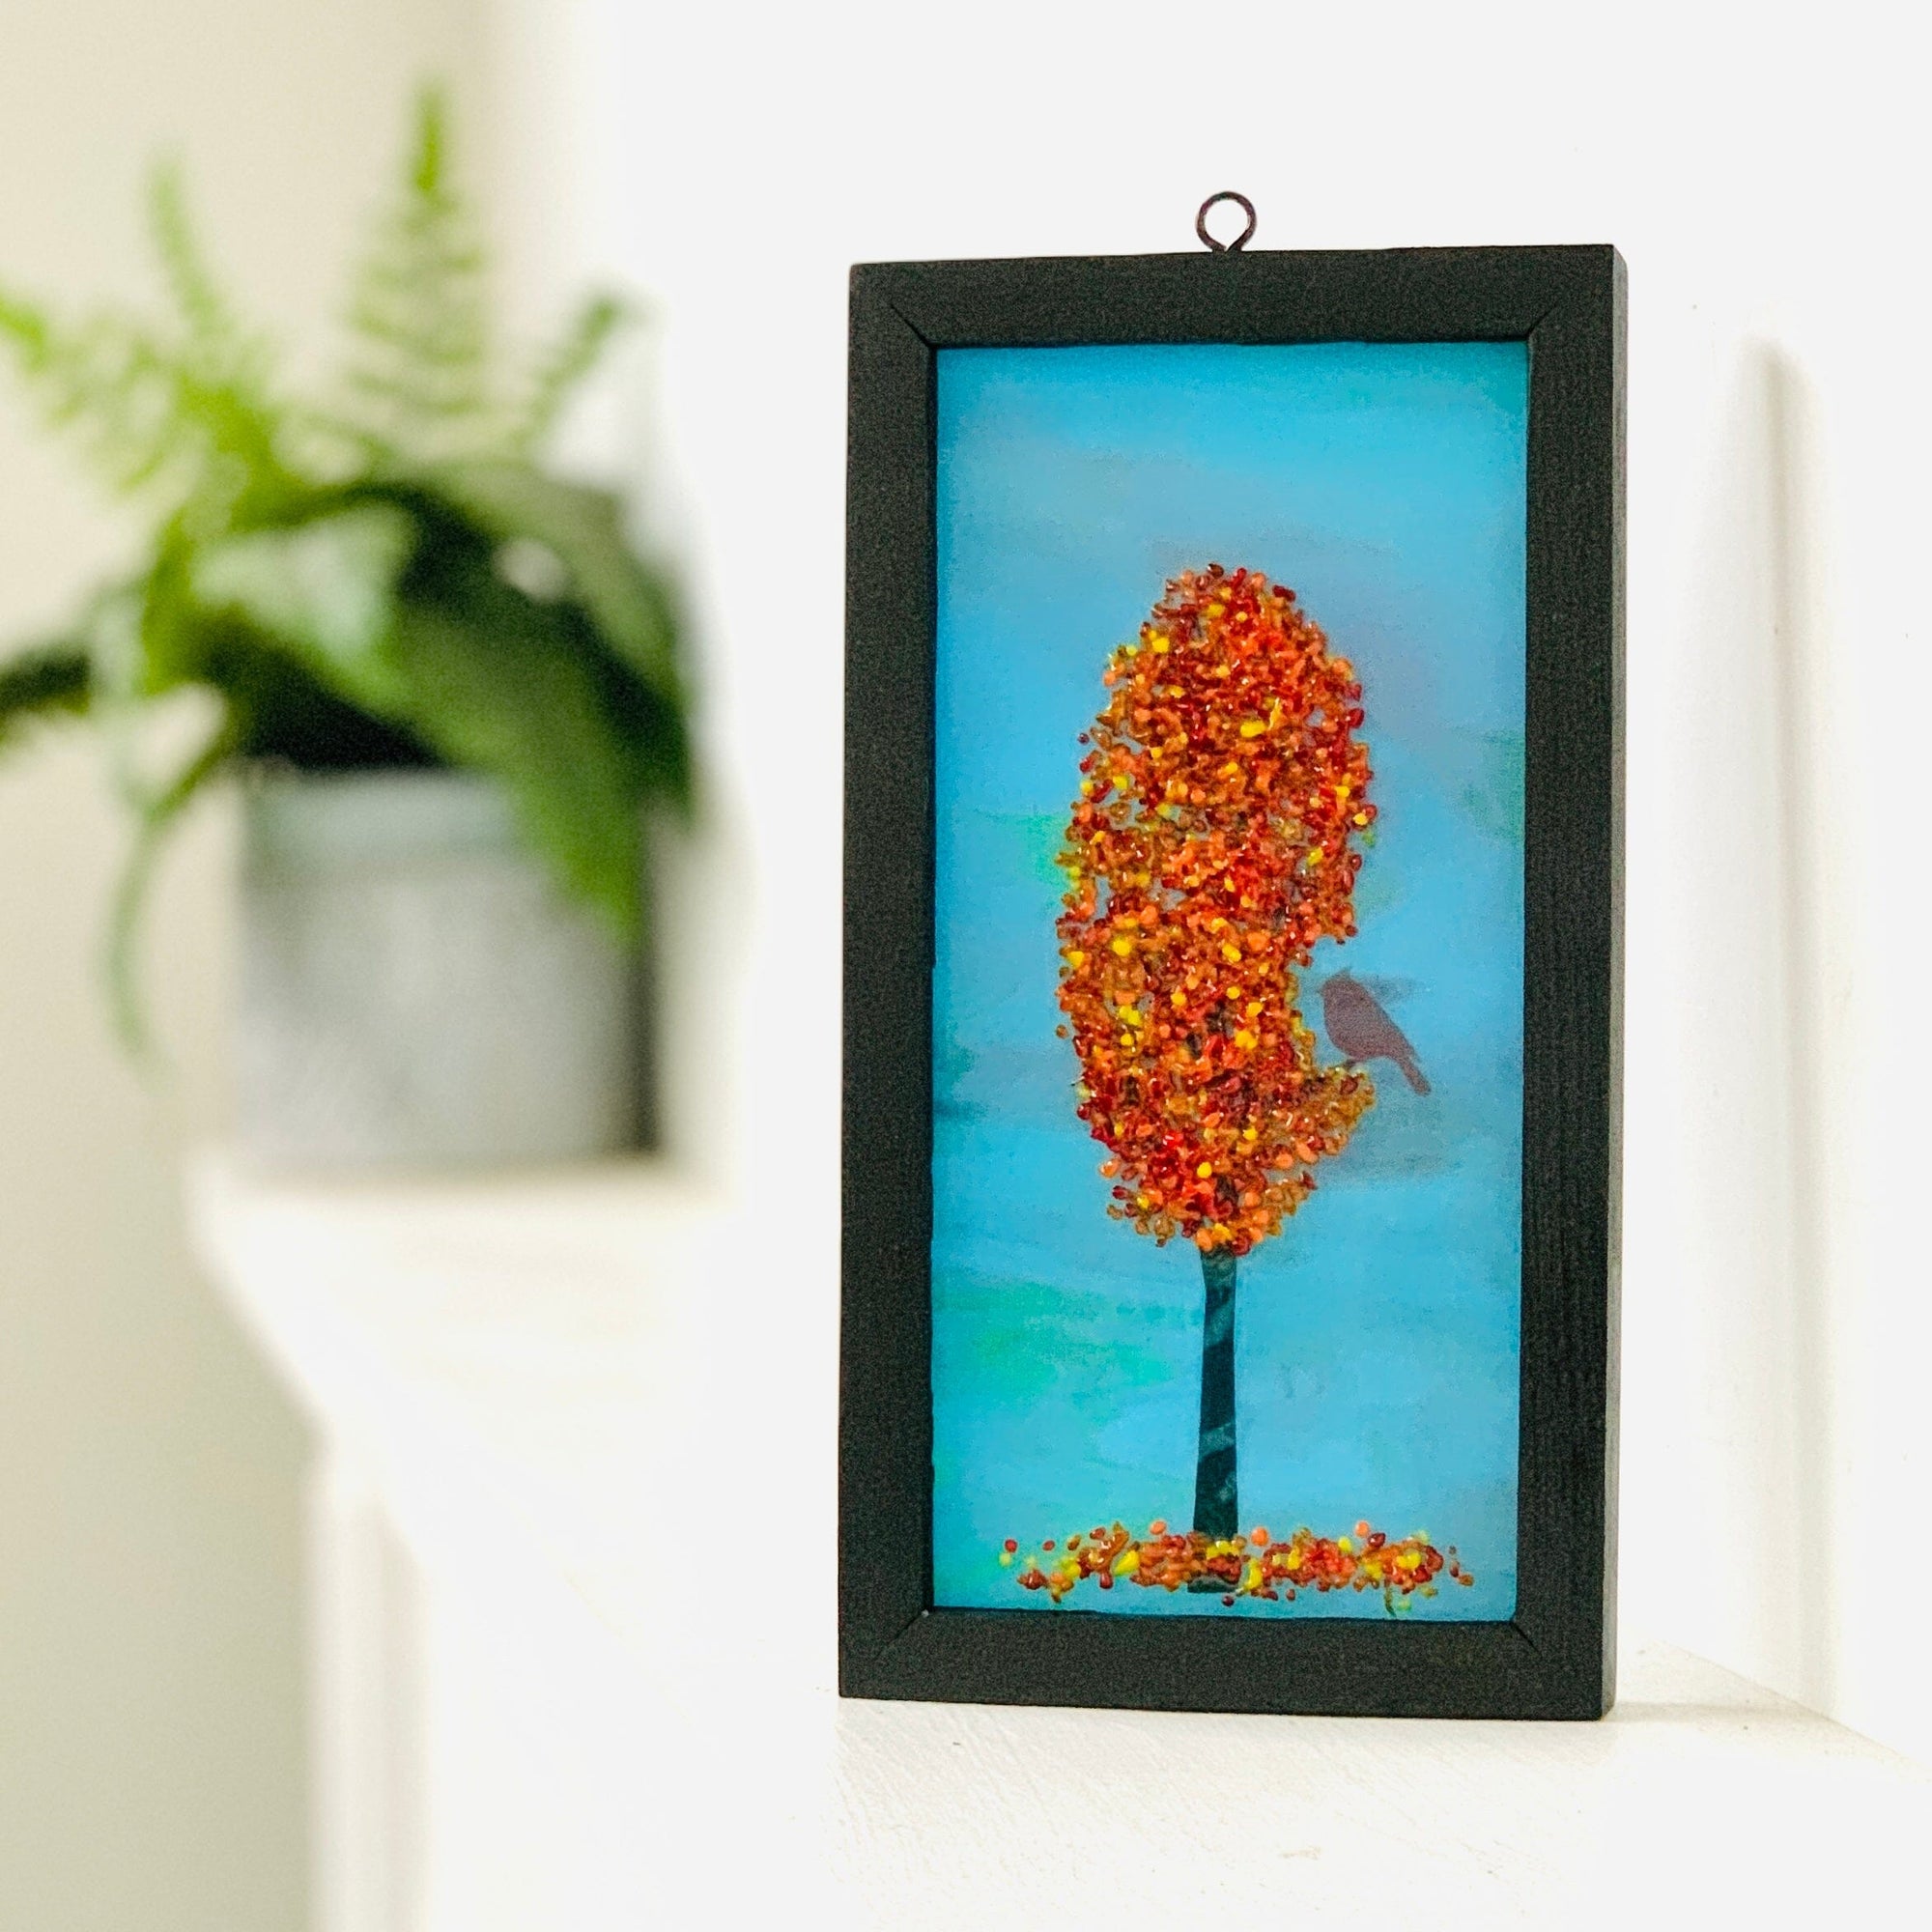 Fused Glass Tree of Life with Cardinal, Shadow Box 1 Decor Glimmer Glass Gifts 